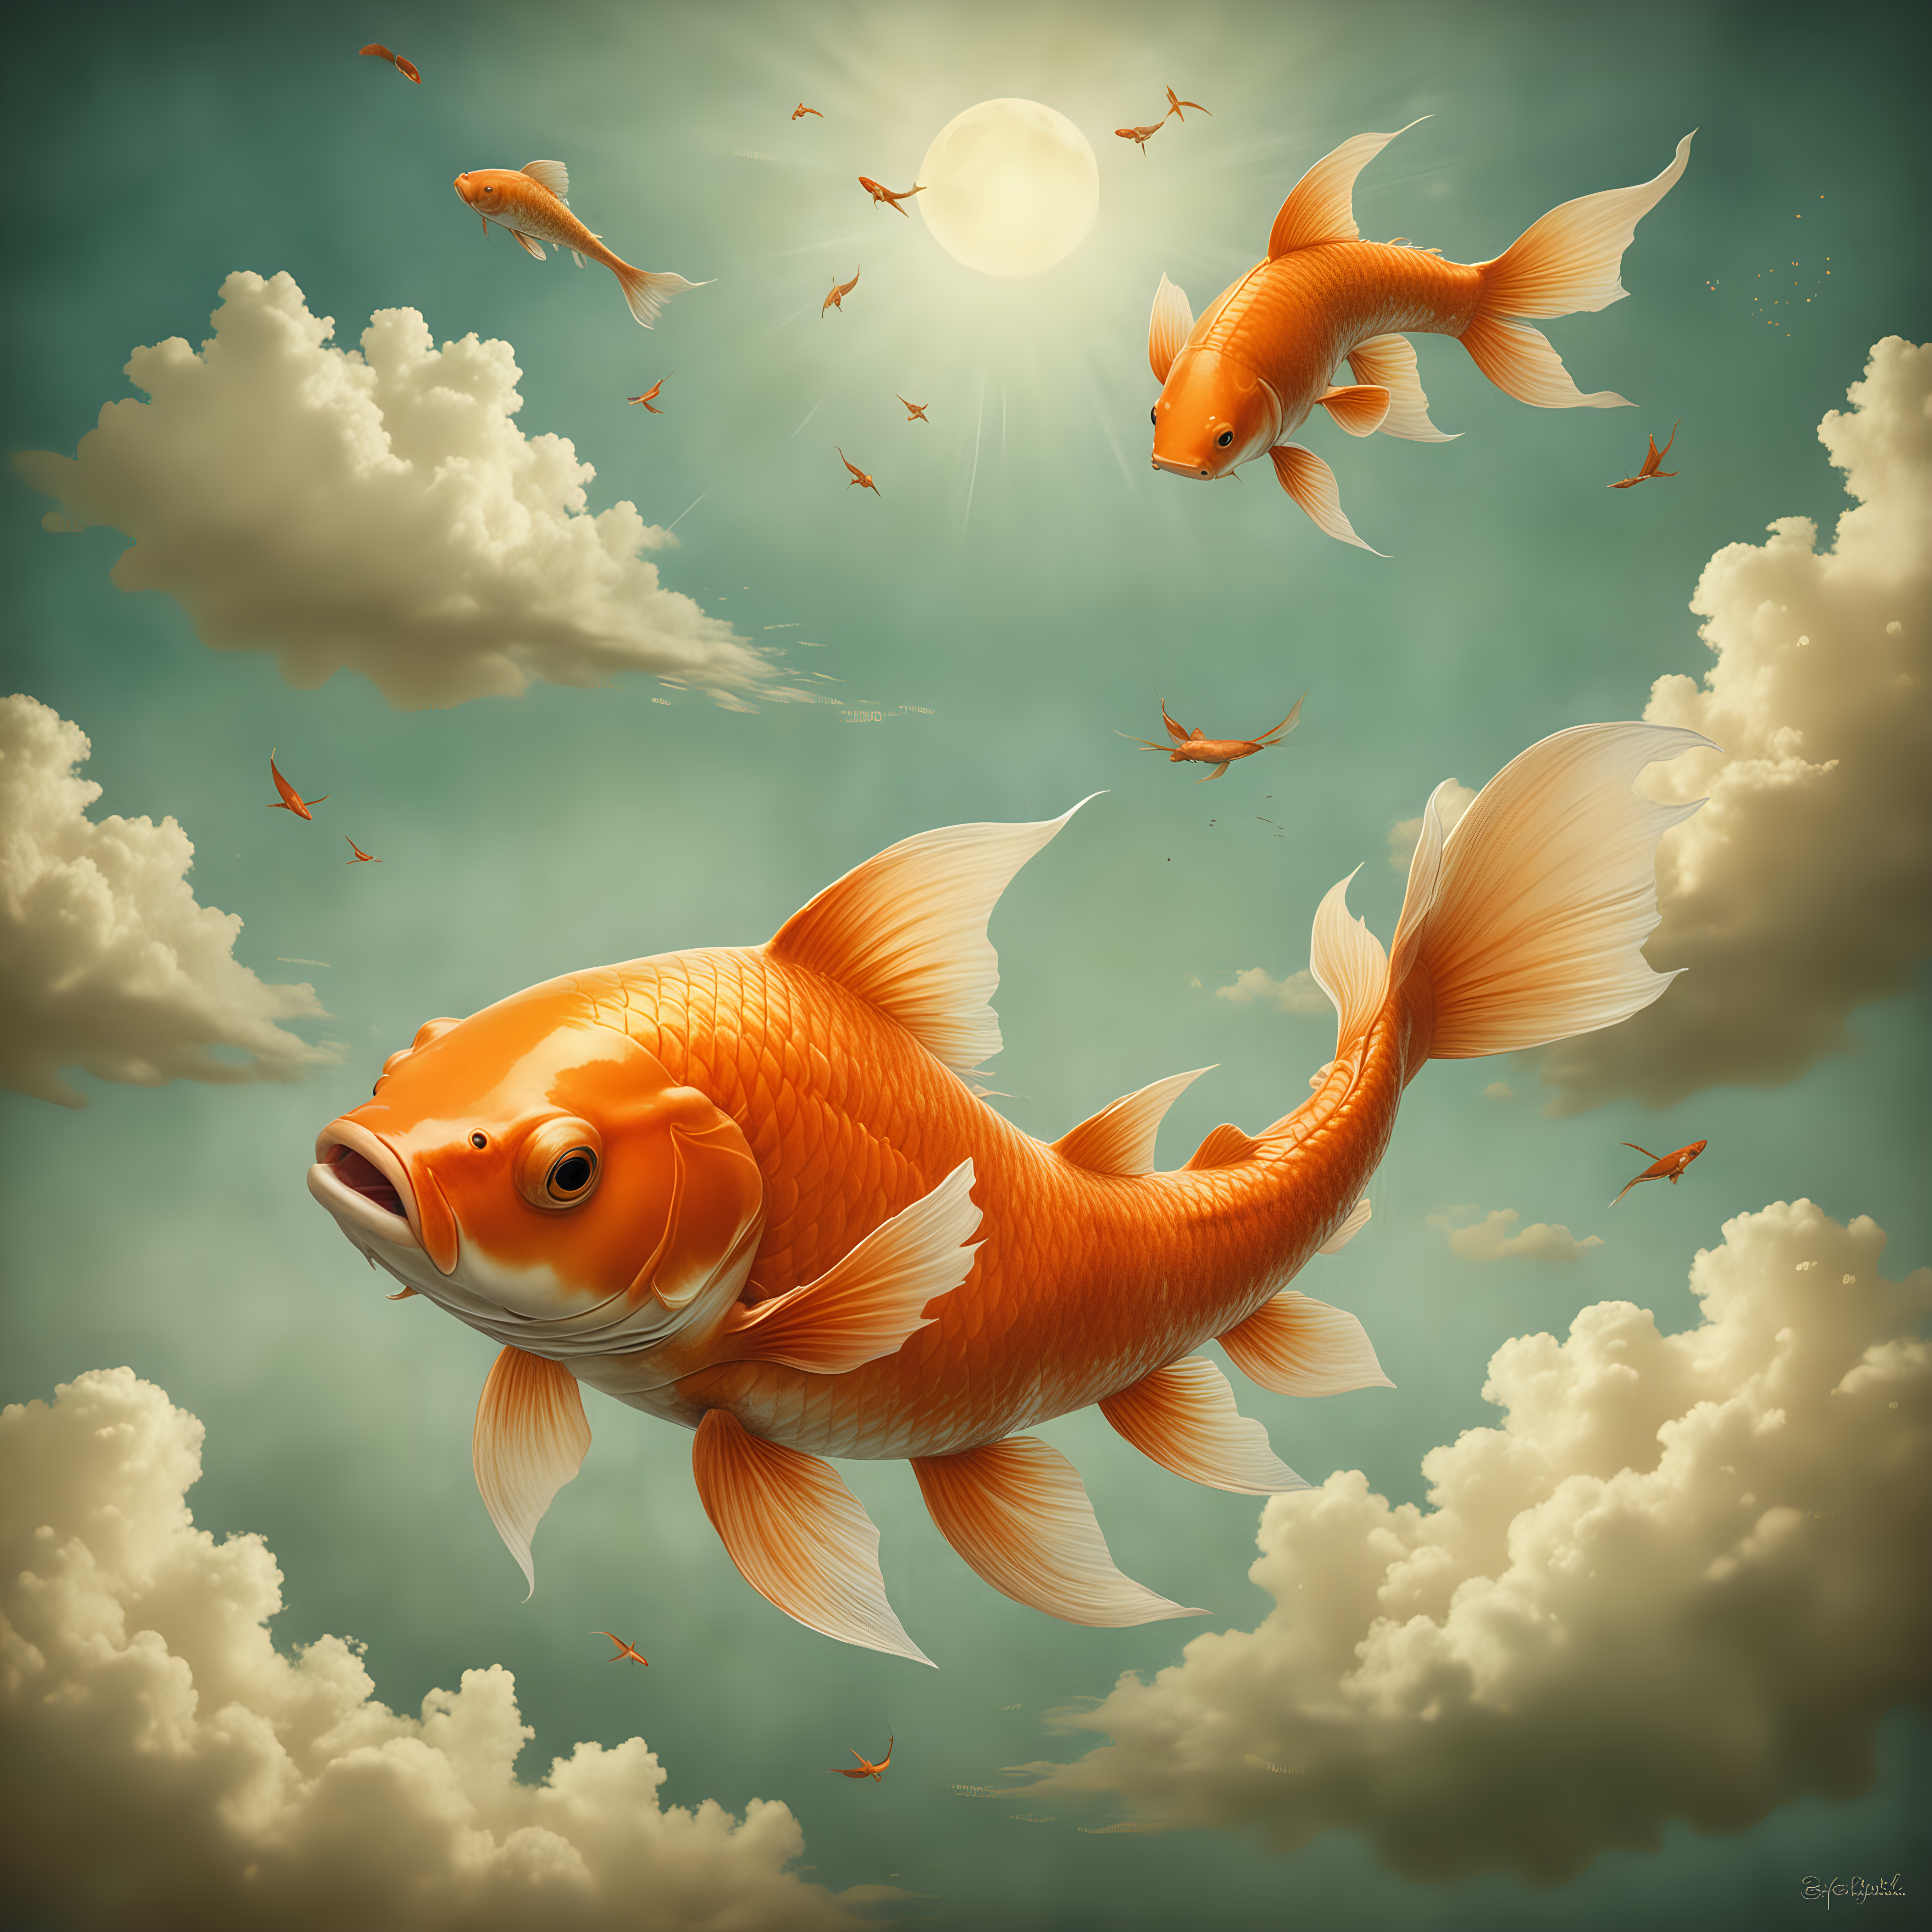 Surreal Painting of a Majestic Orange Koi Fish in Heavenly Sky